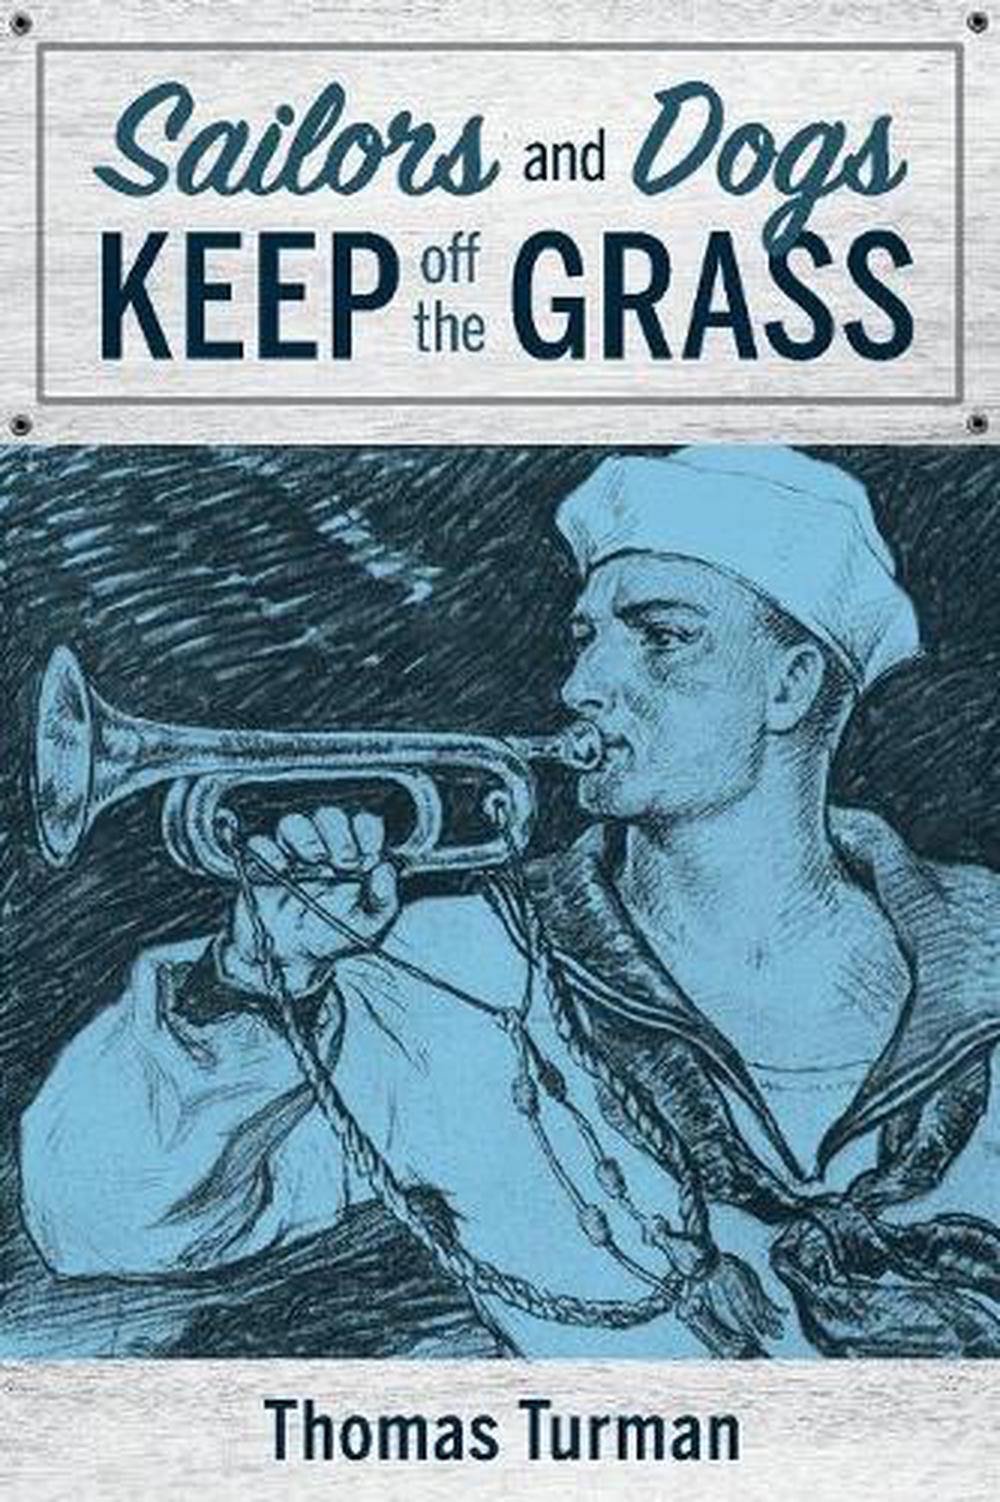 Sailors and Dogs Keep Off the Grass by Thomas Turman (English